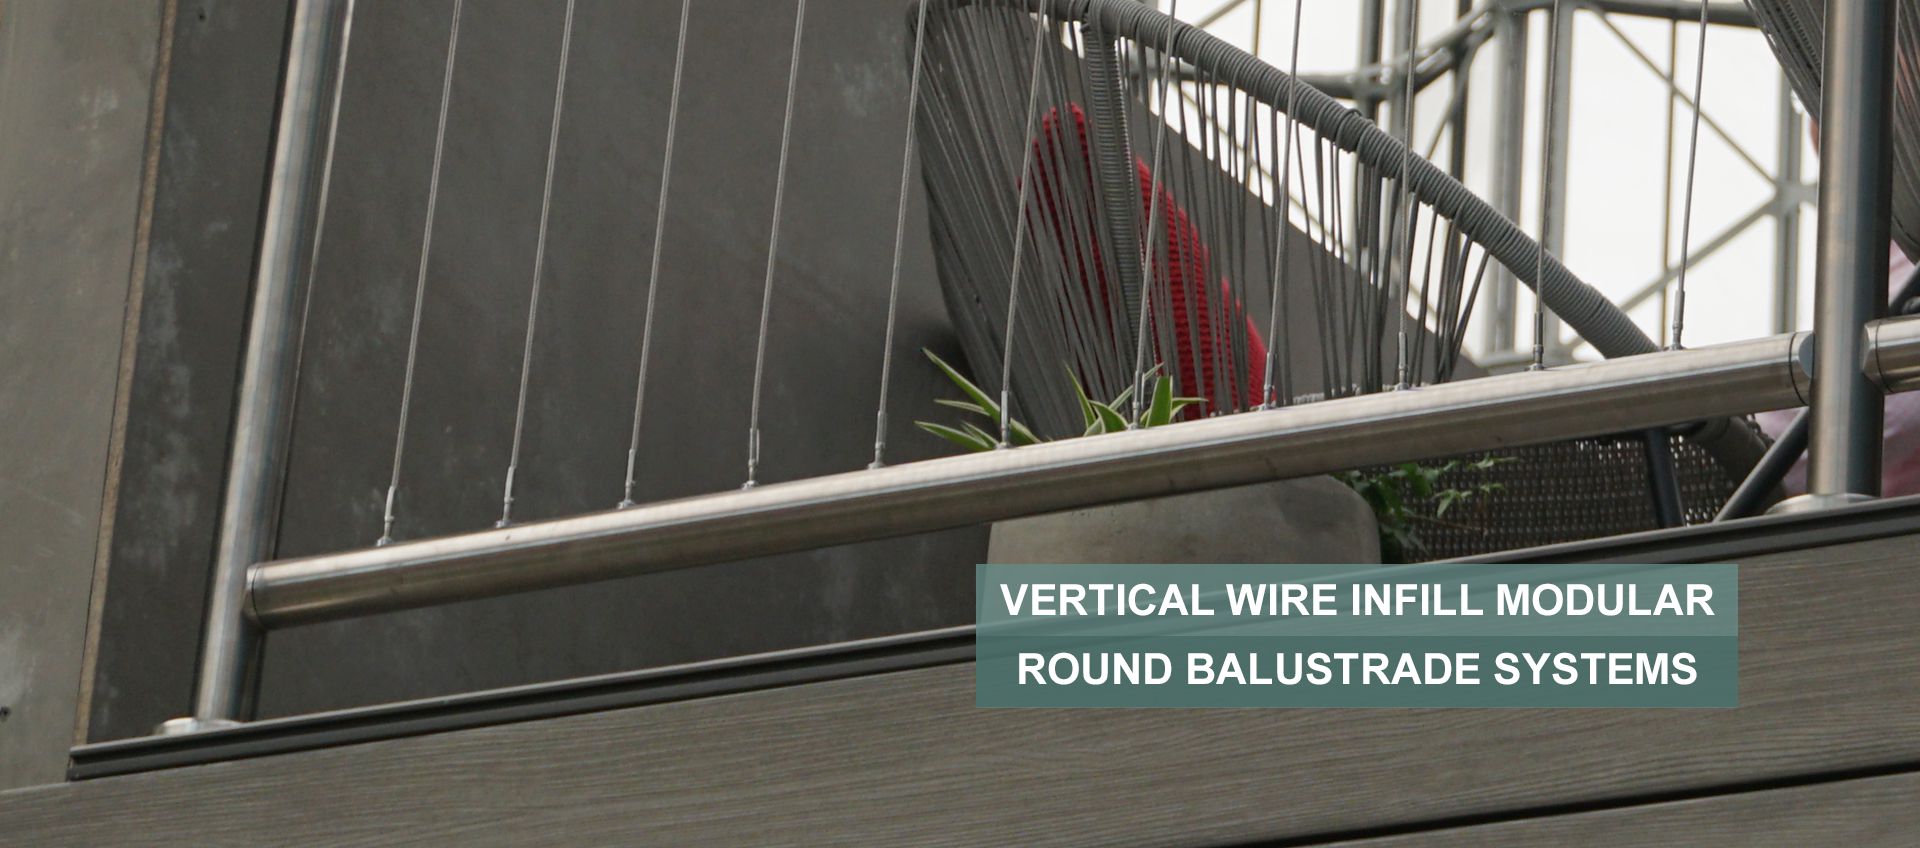 Vertical wire rope infill balustrade on a balcony